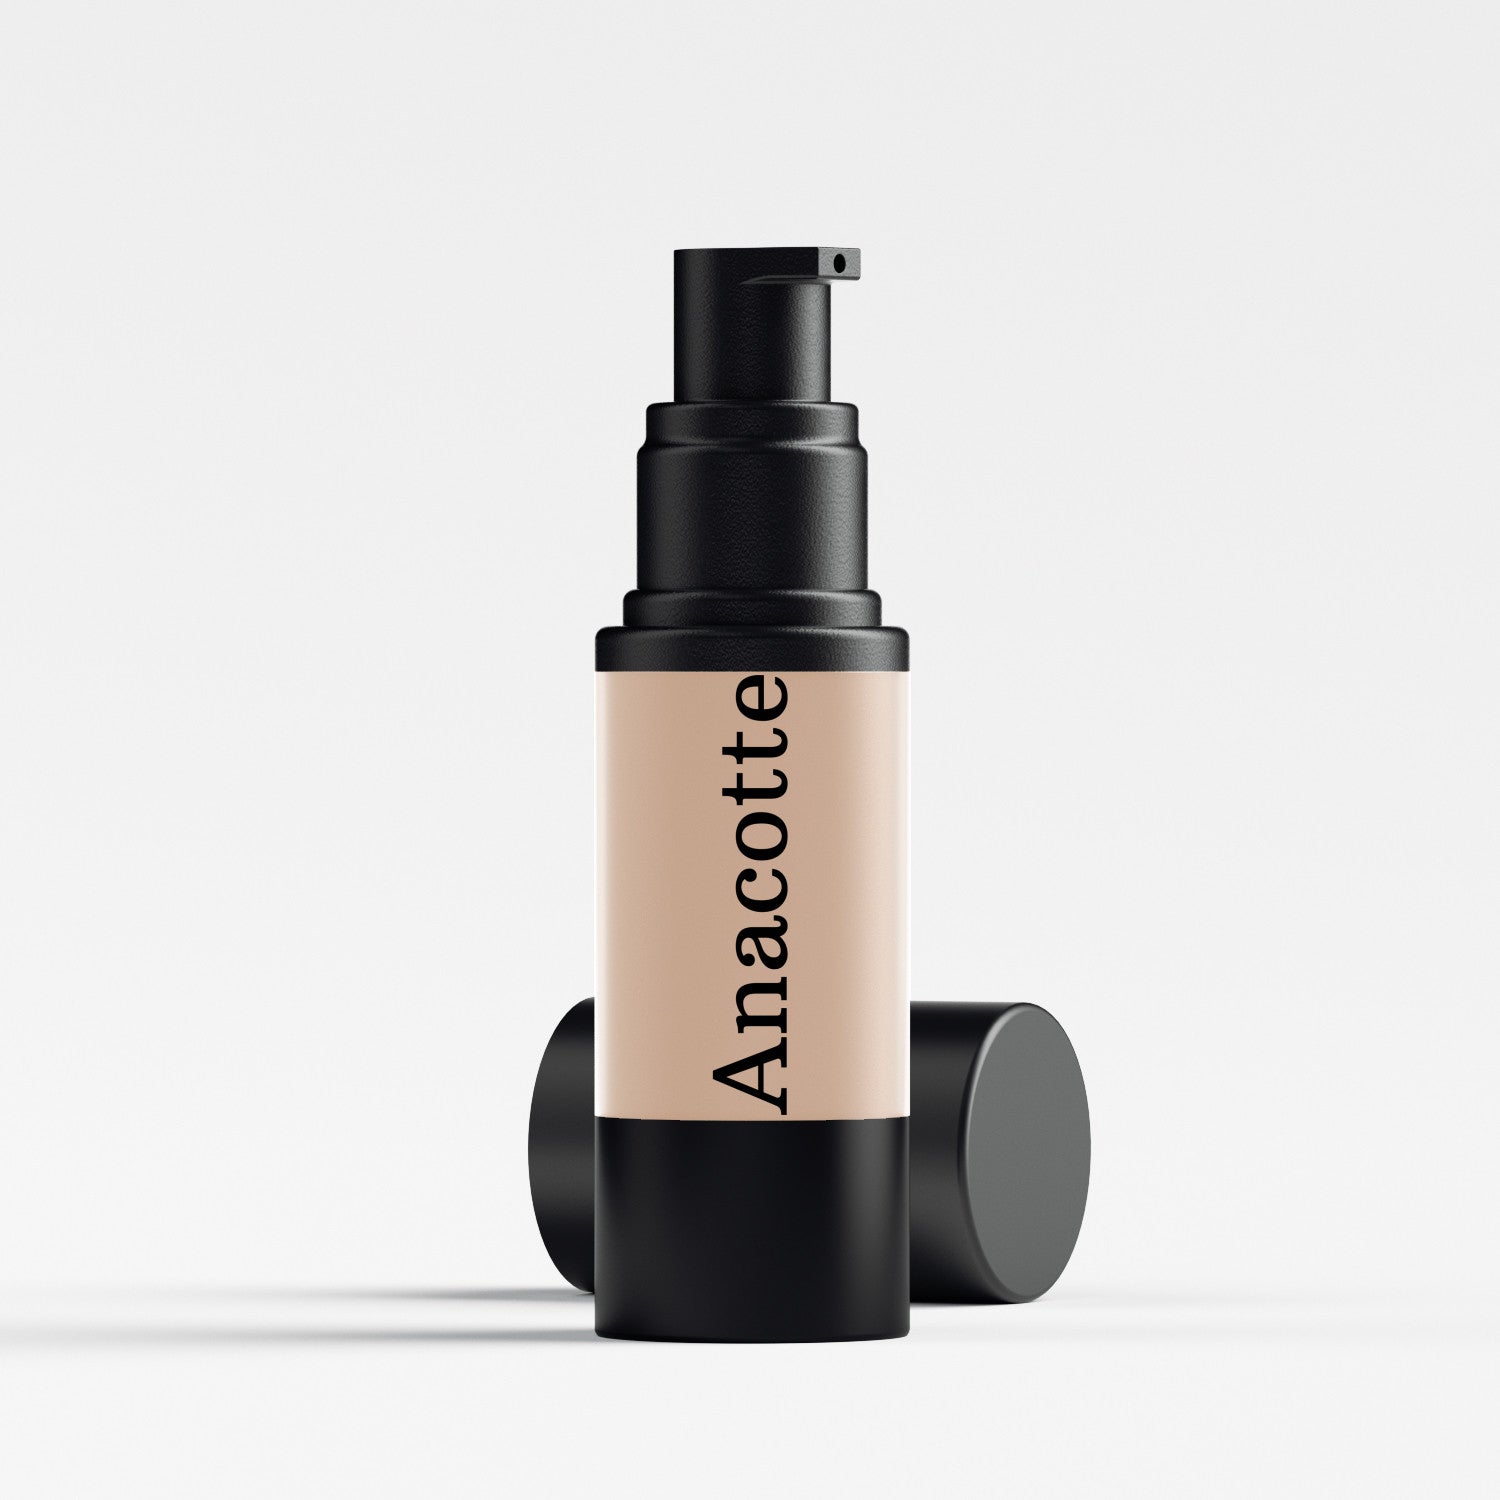 Anacotte's BB Cream - Perfect Blend of Skincare and Makeup